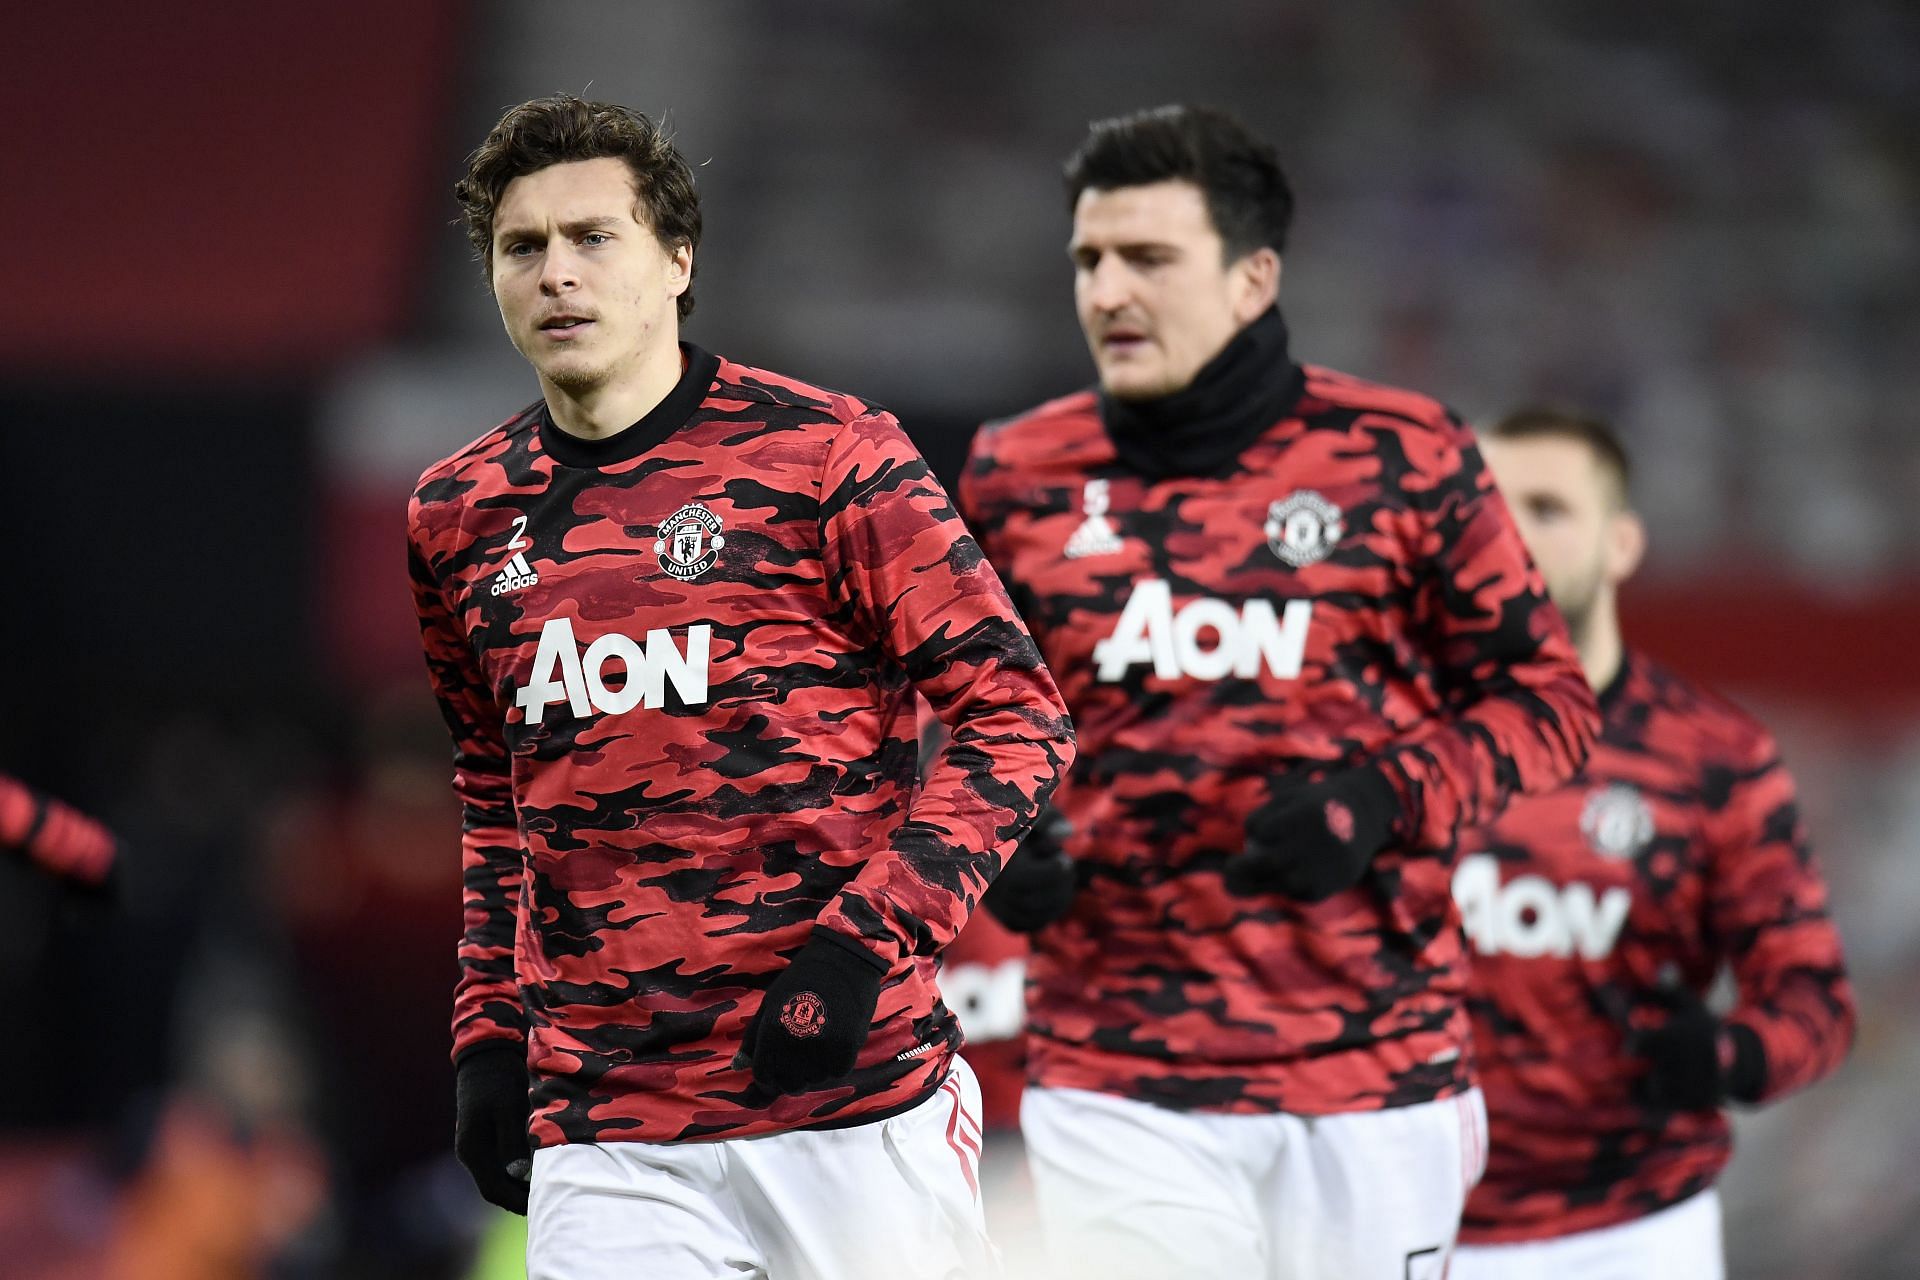 Lindelof and Maguire have slipped in the pecking order